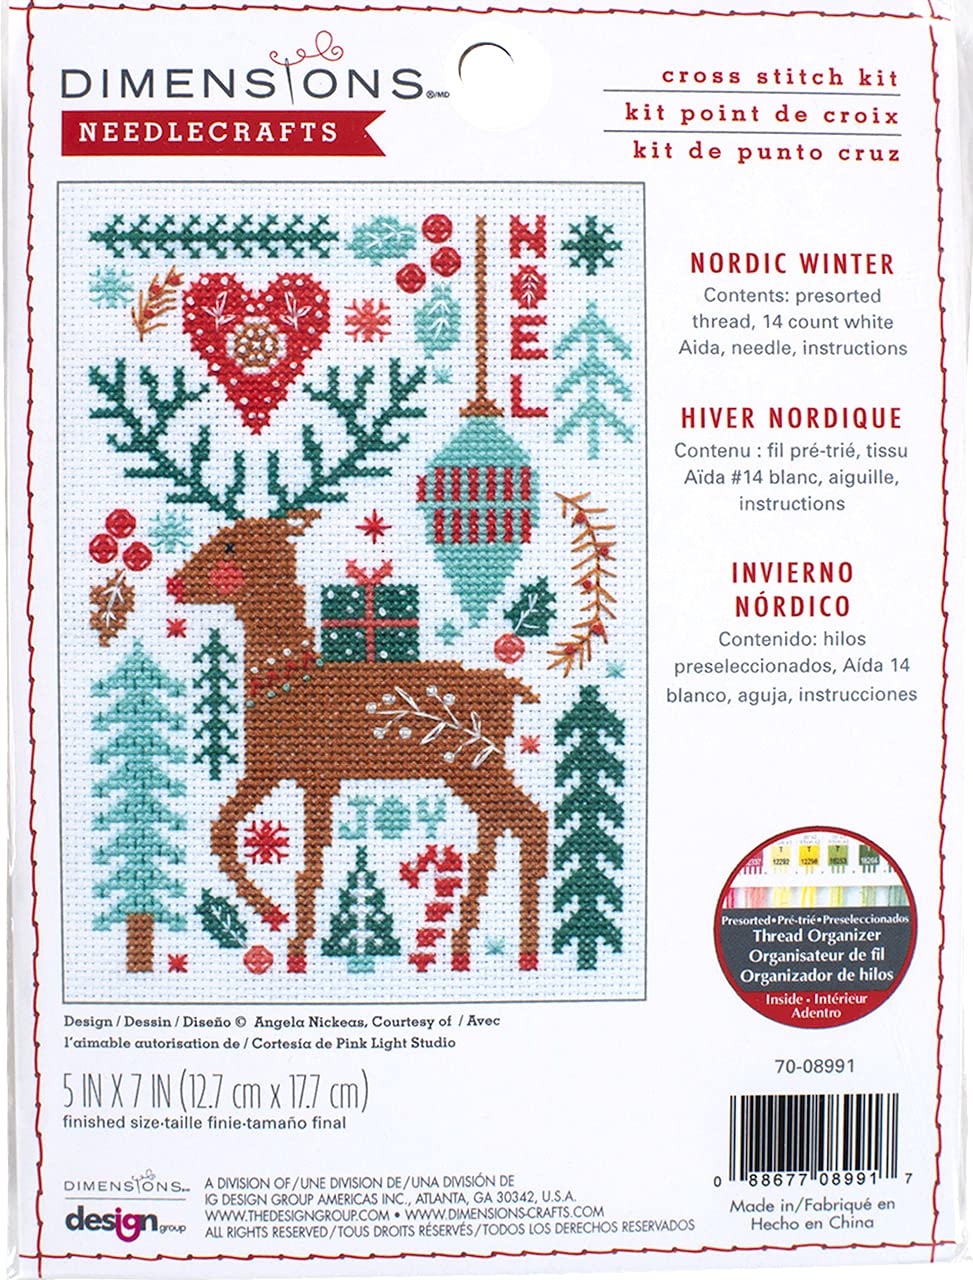 Dimensions 70-08991 Nordic Winter Embroidery Christmas Cross Stitch Kit, 5'' x 7'', 14 Count White Aida, Multi